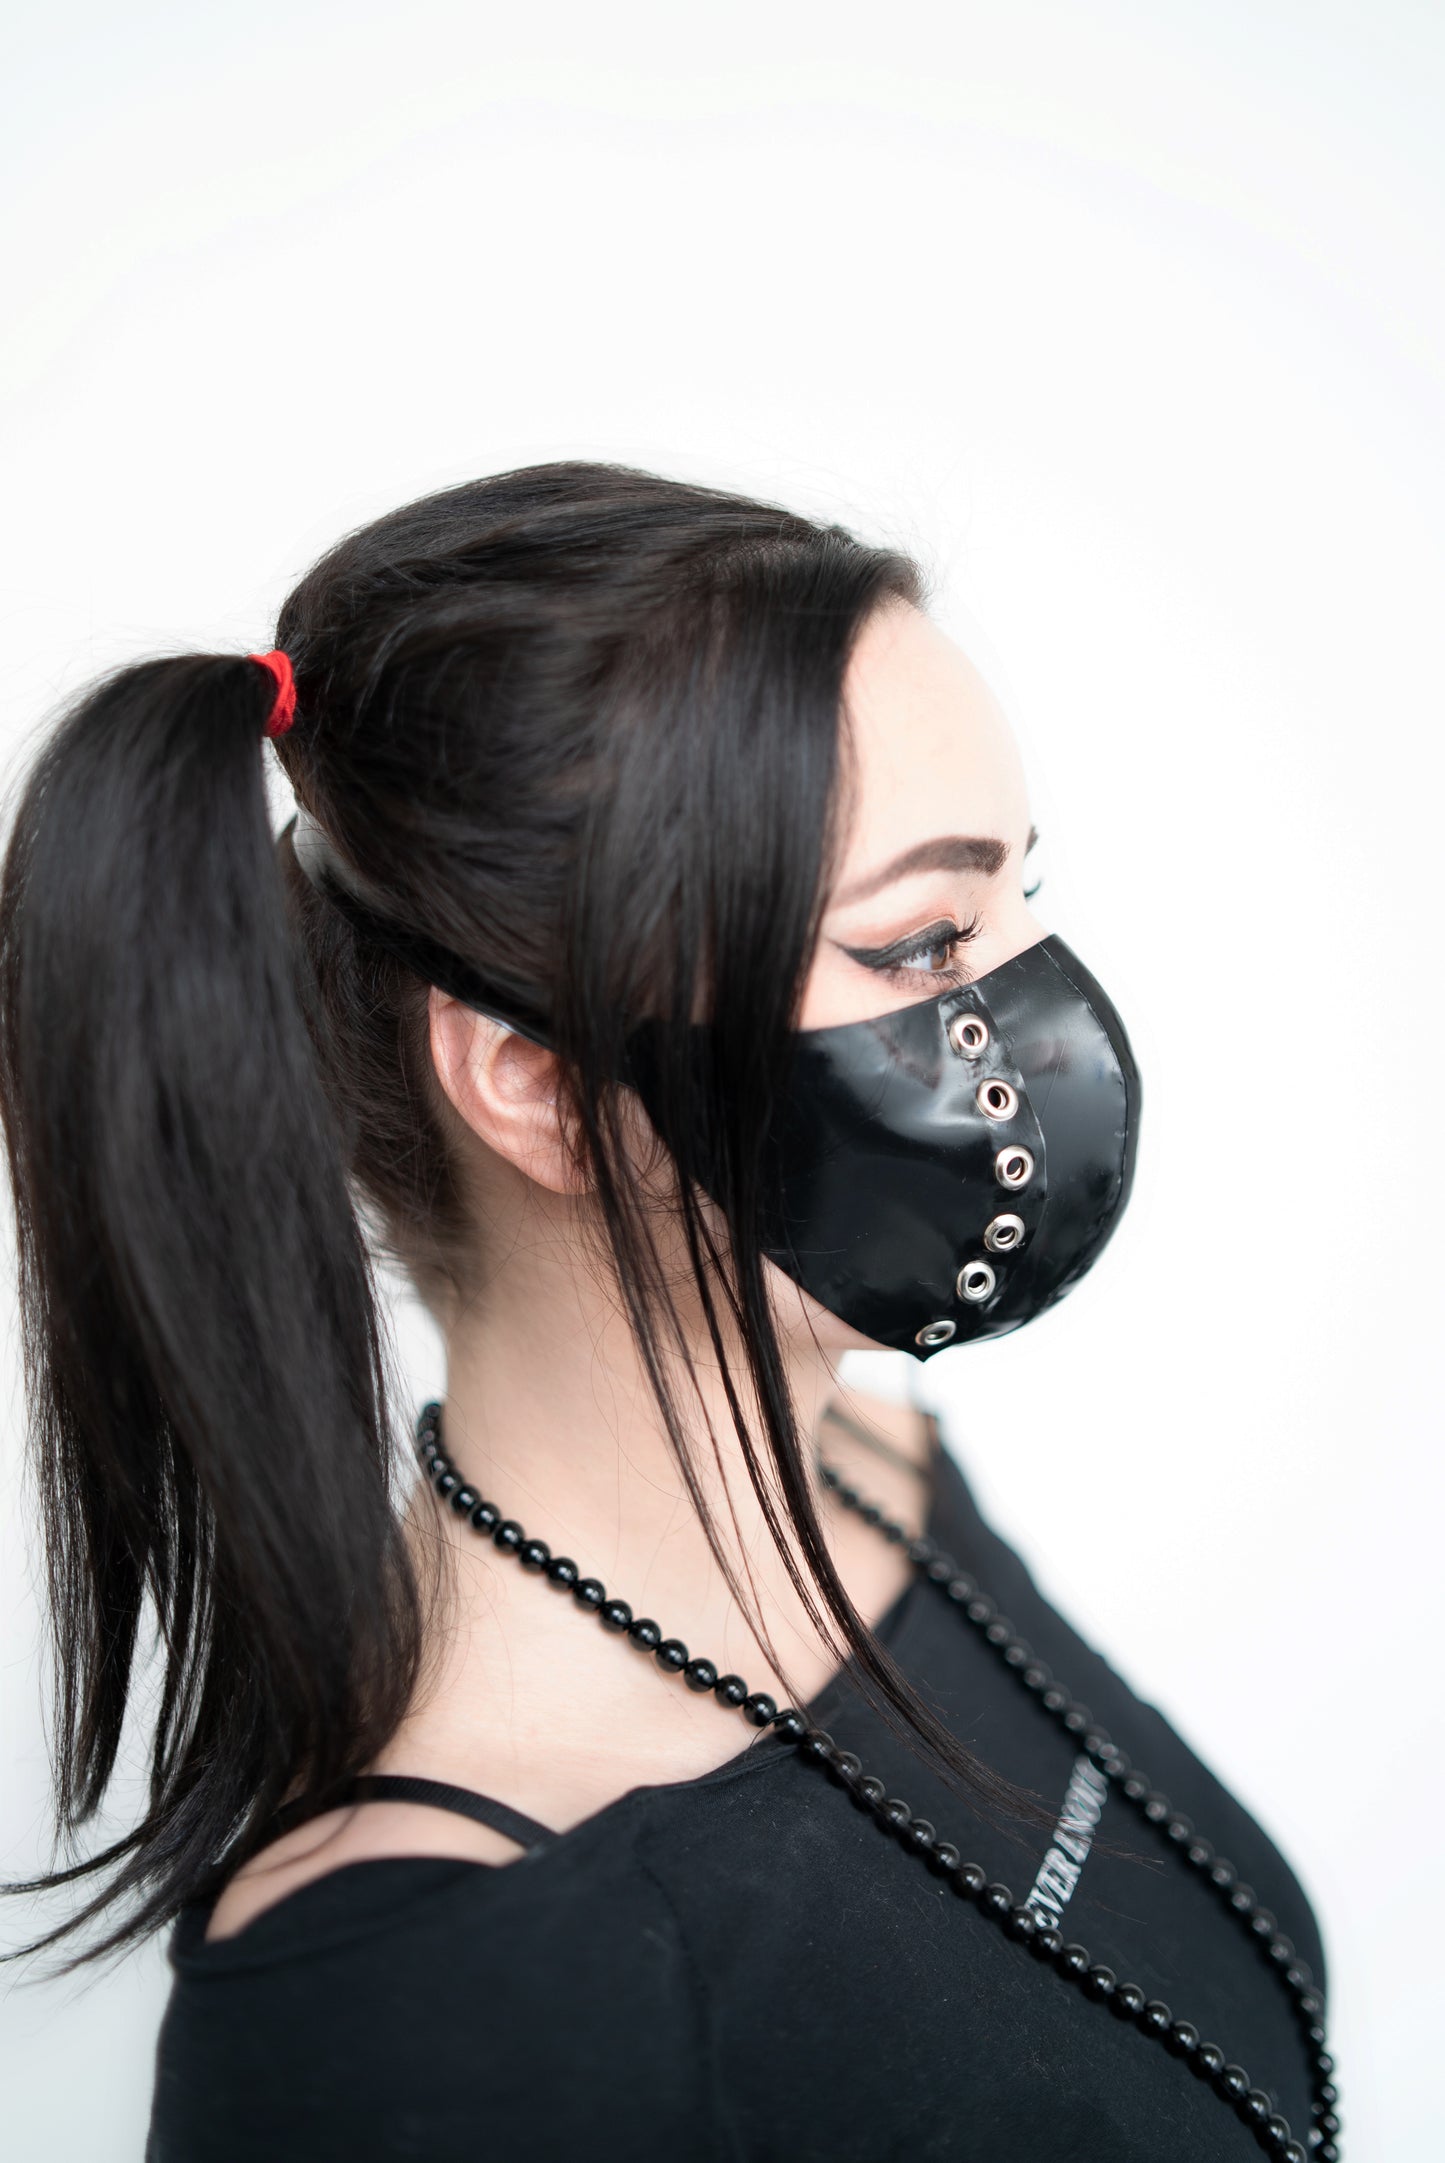 "Black Metal" Latex facemask with inner filter